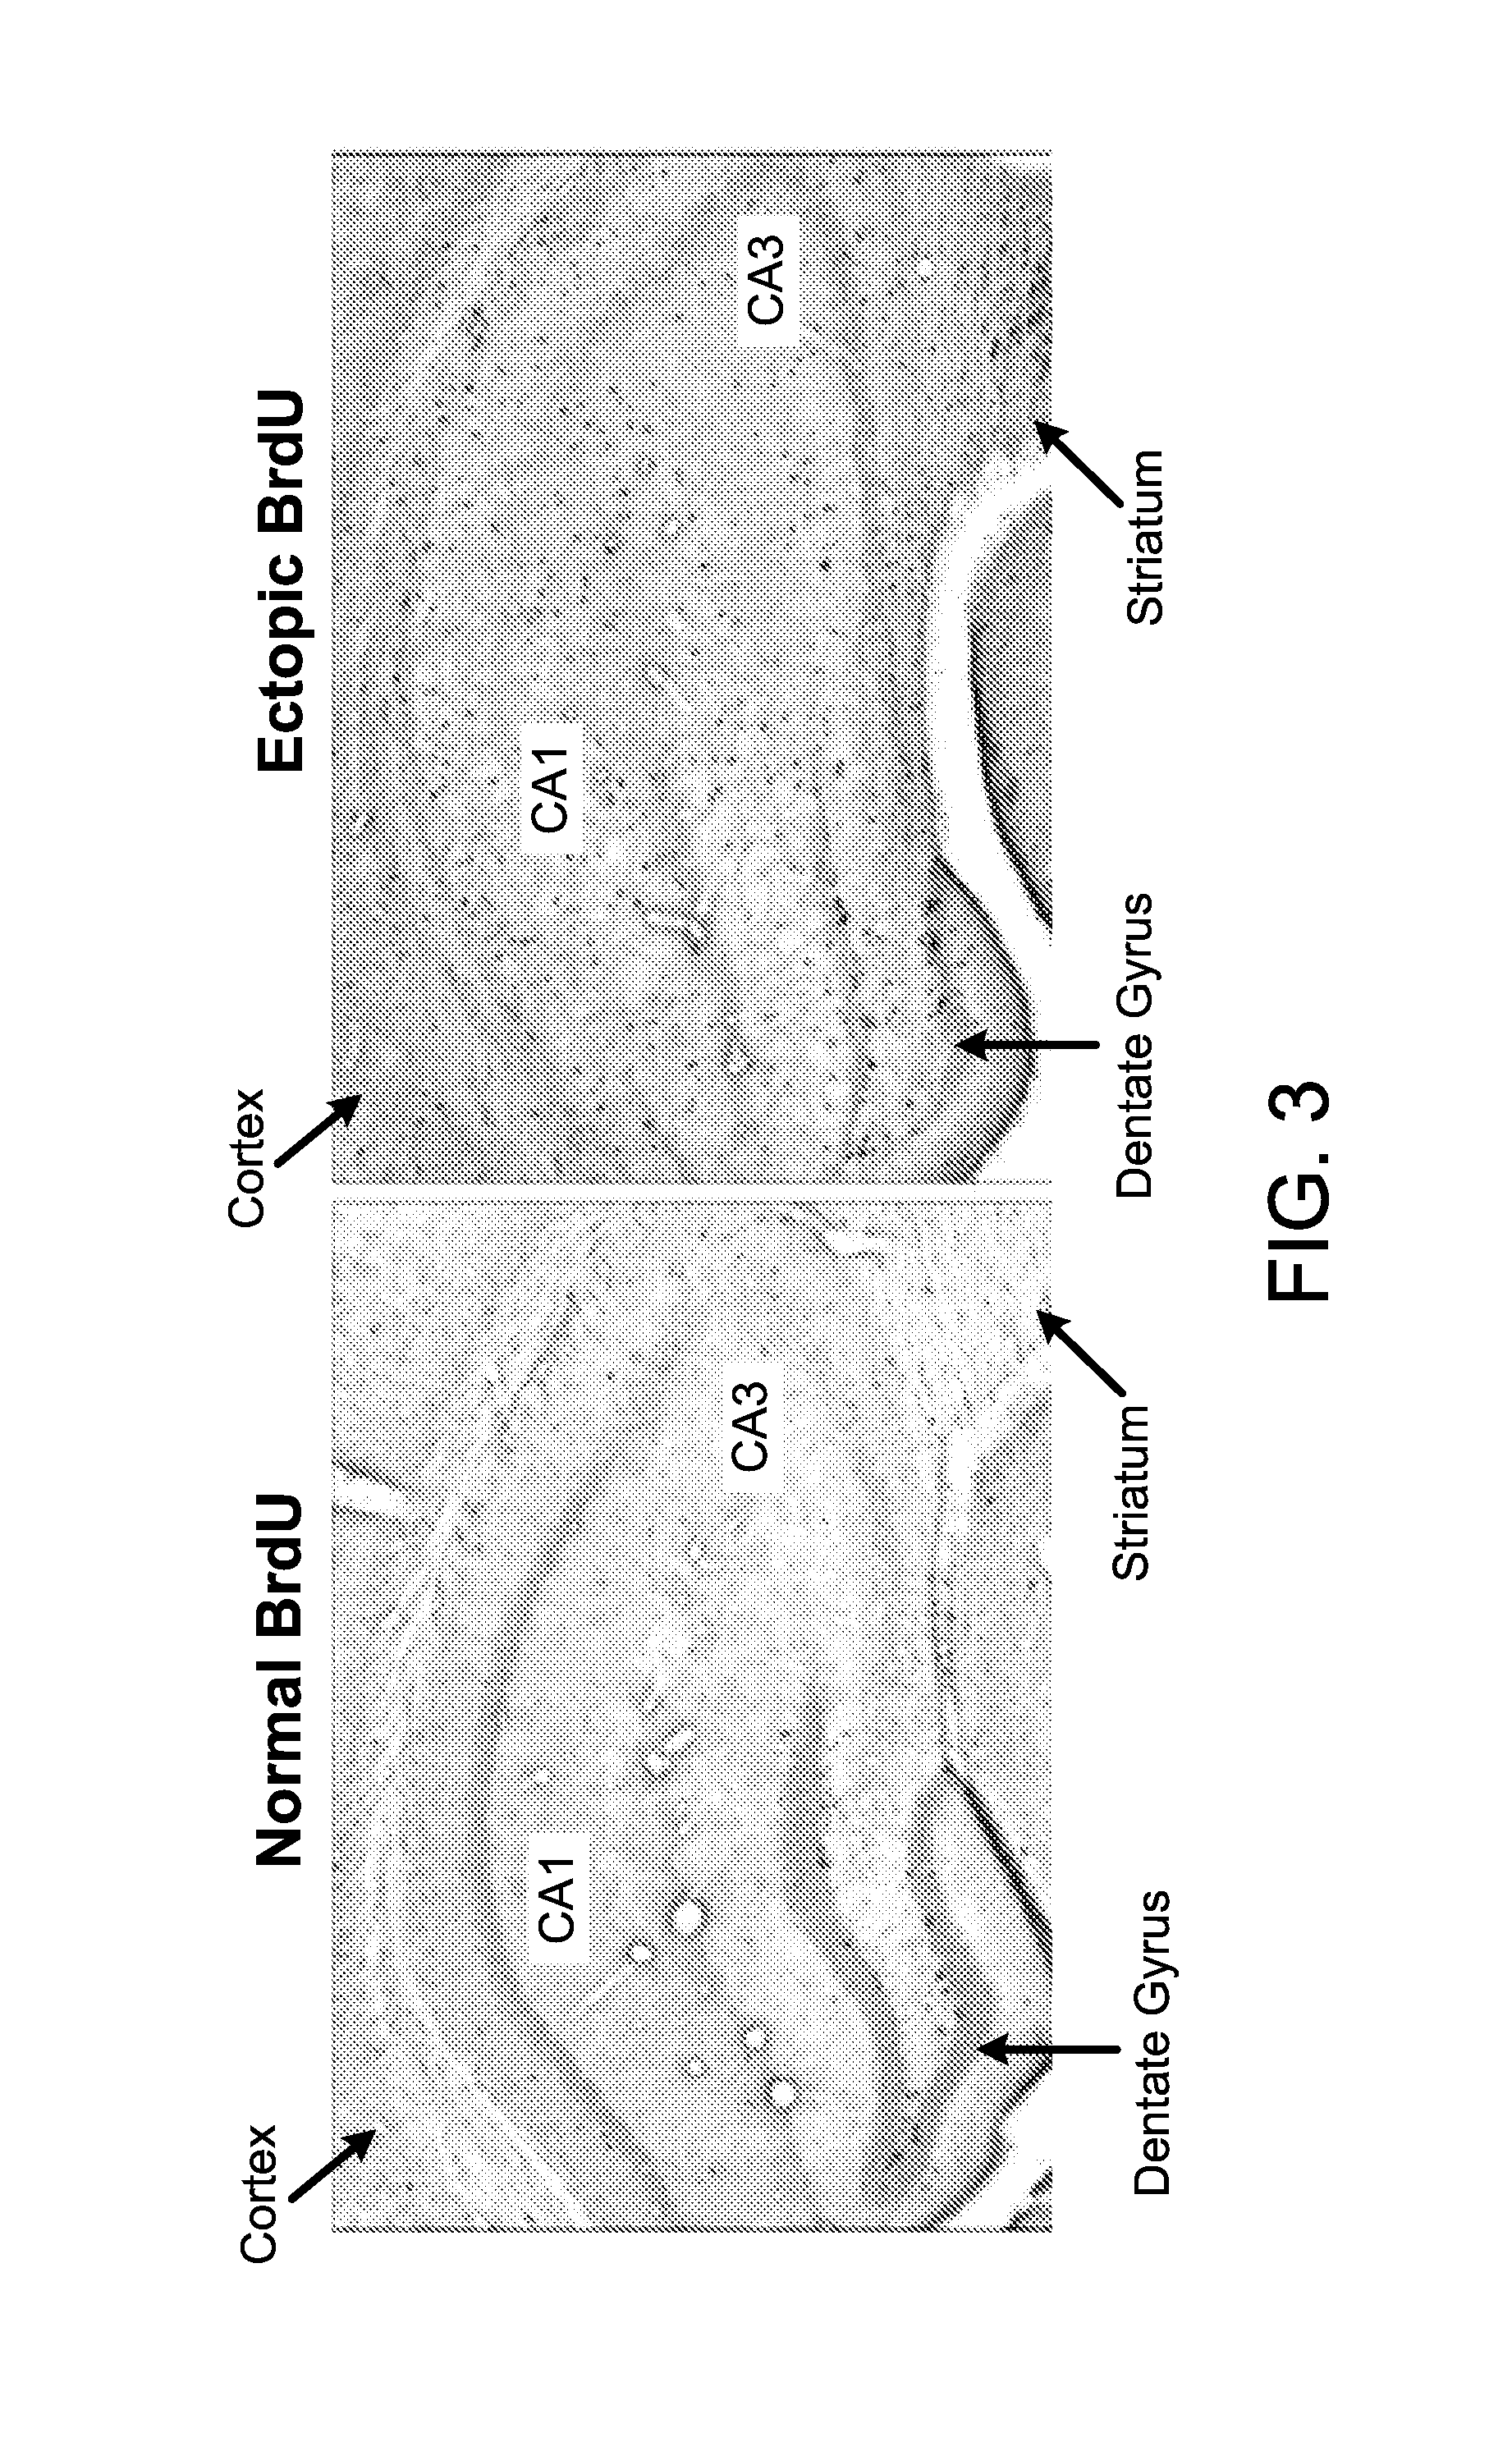 Methods for treating Parkinson's disease using pro-neurogenic compounds